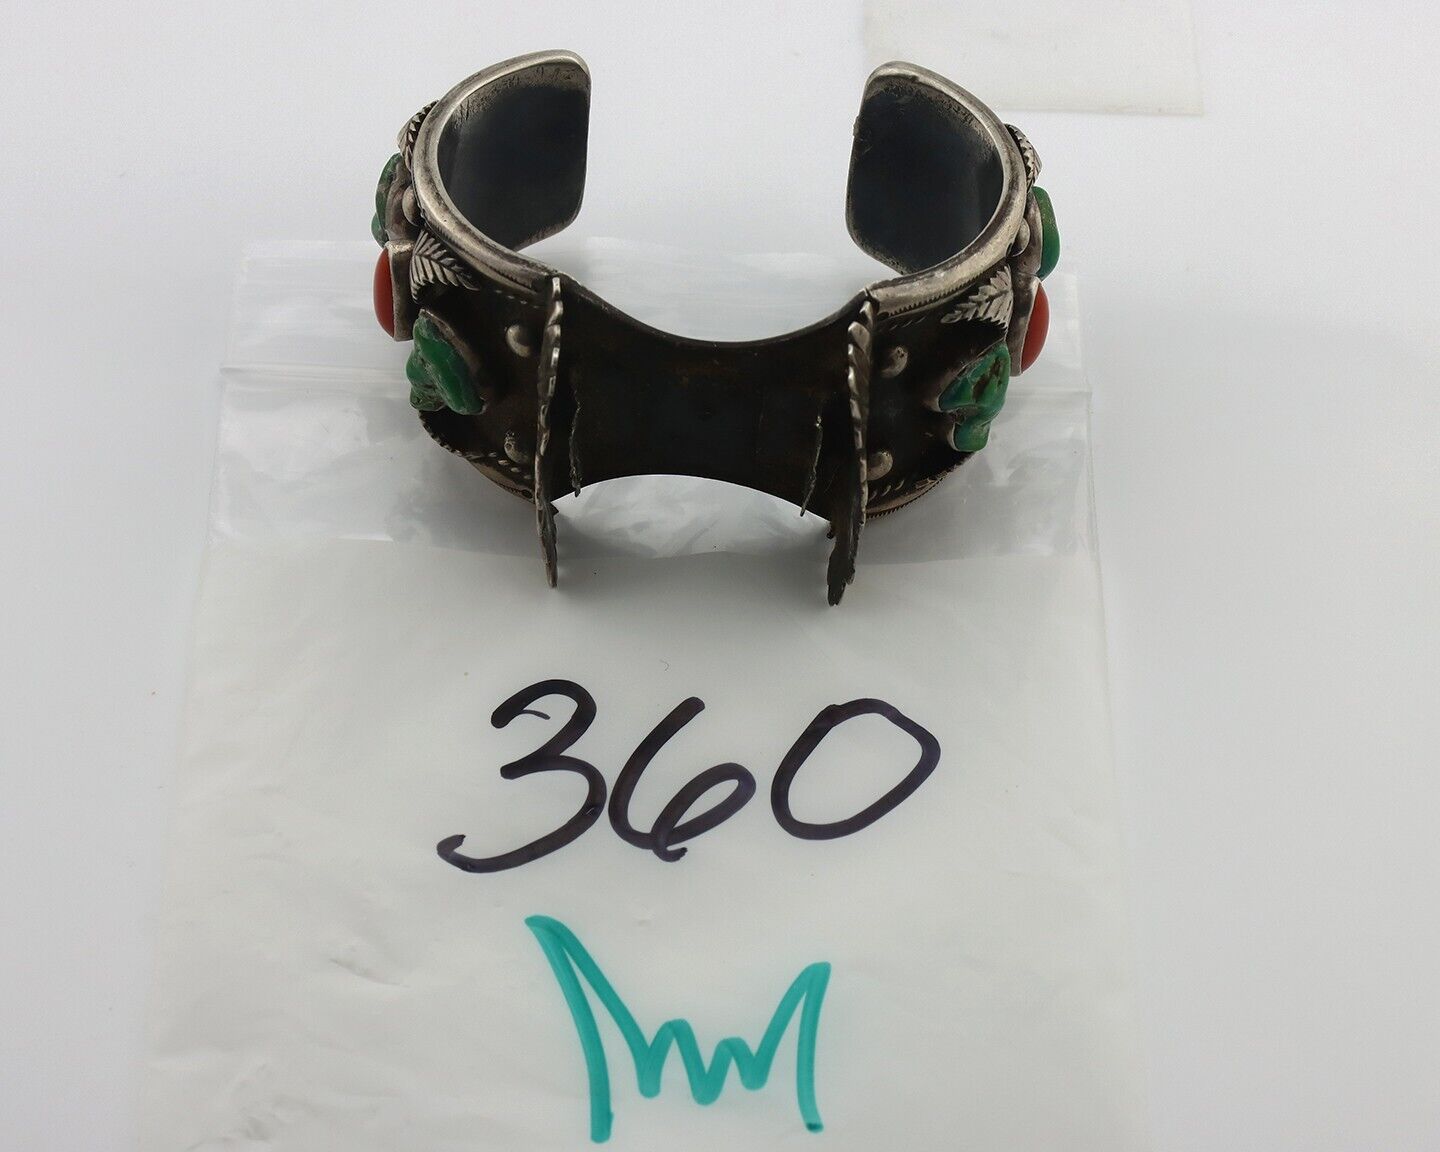 Navajo Cuff Watch Bracelet 925 Silver Green Turquoise Coral Native American C70s